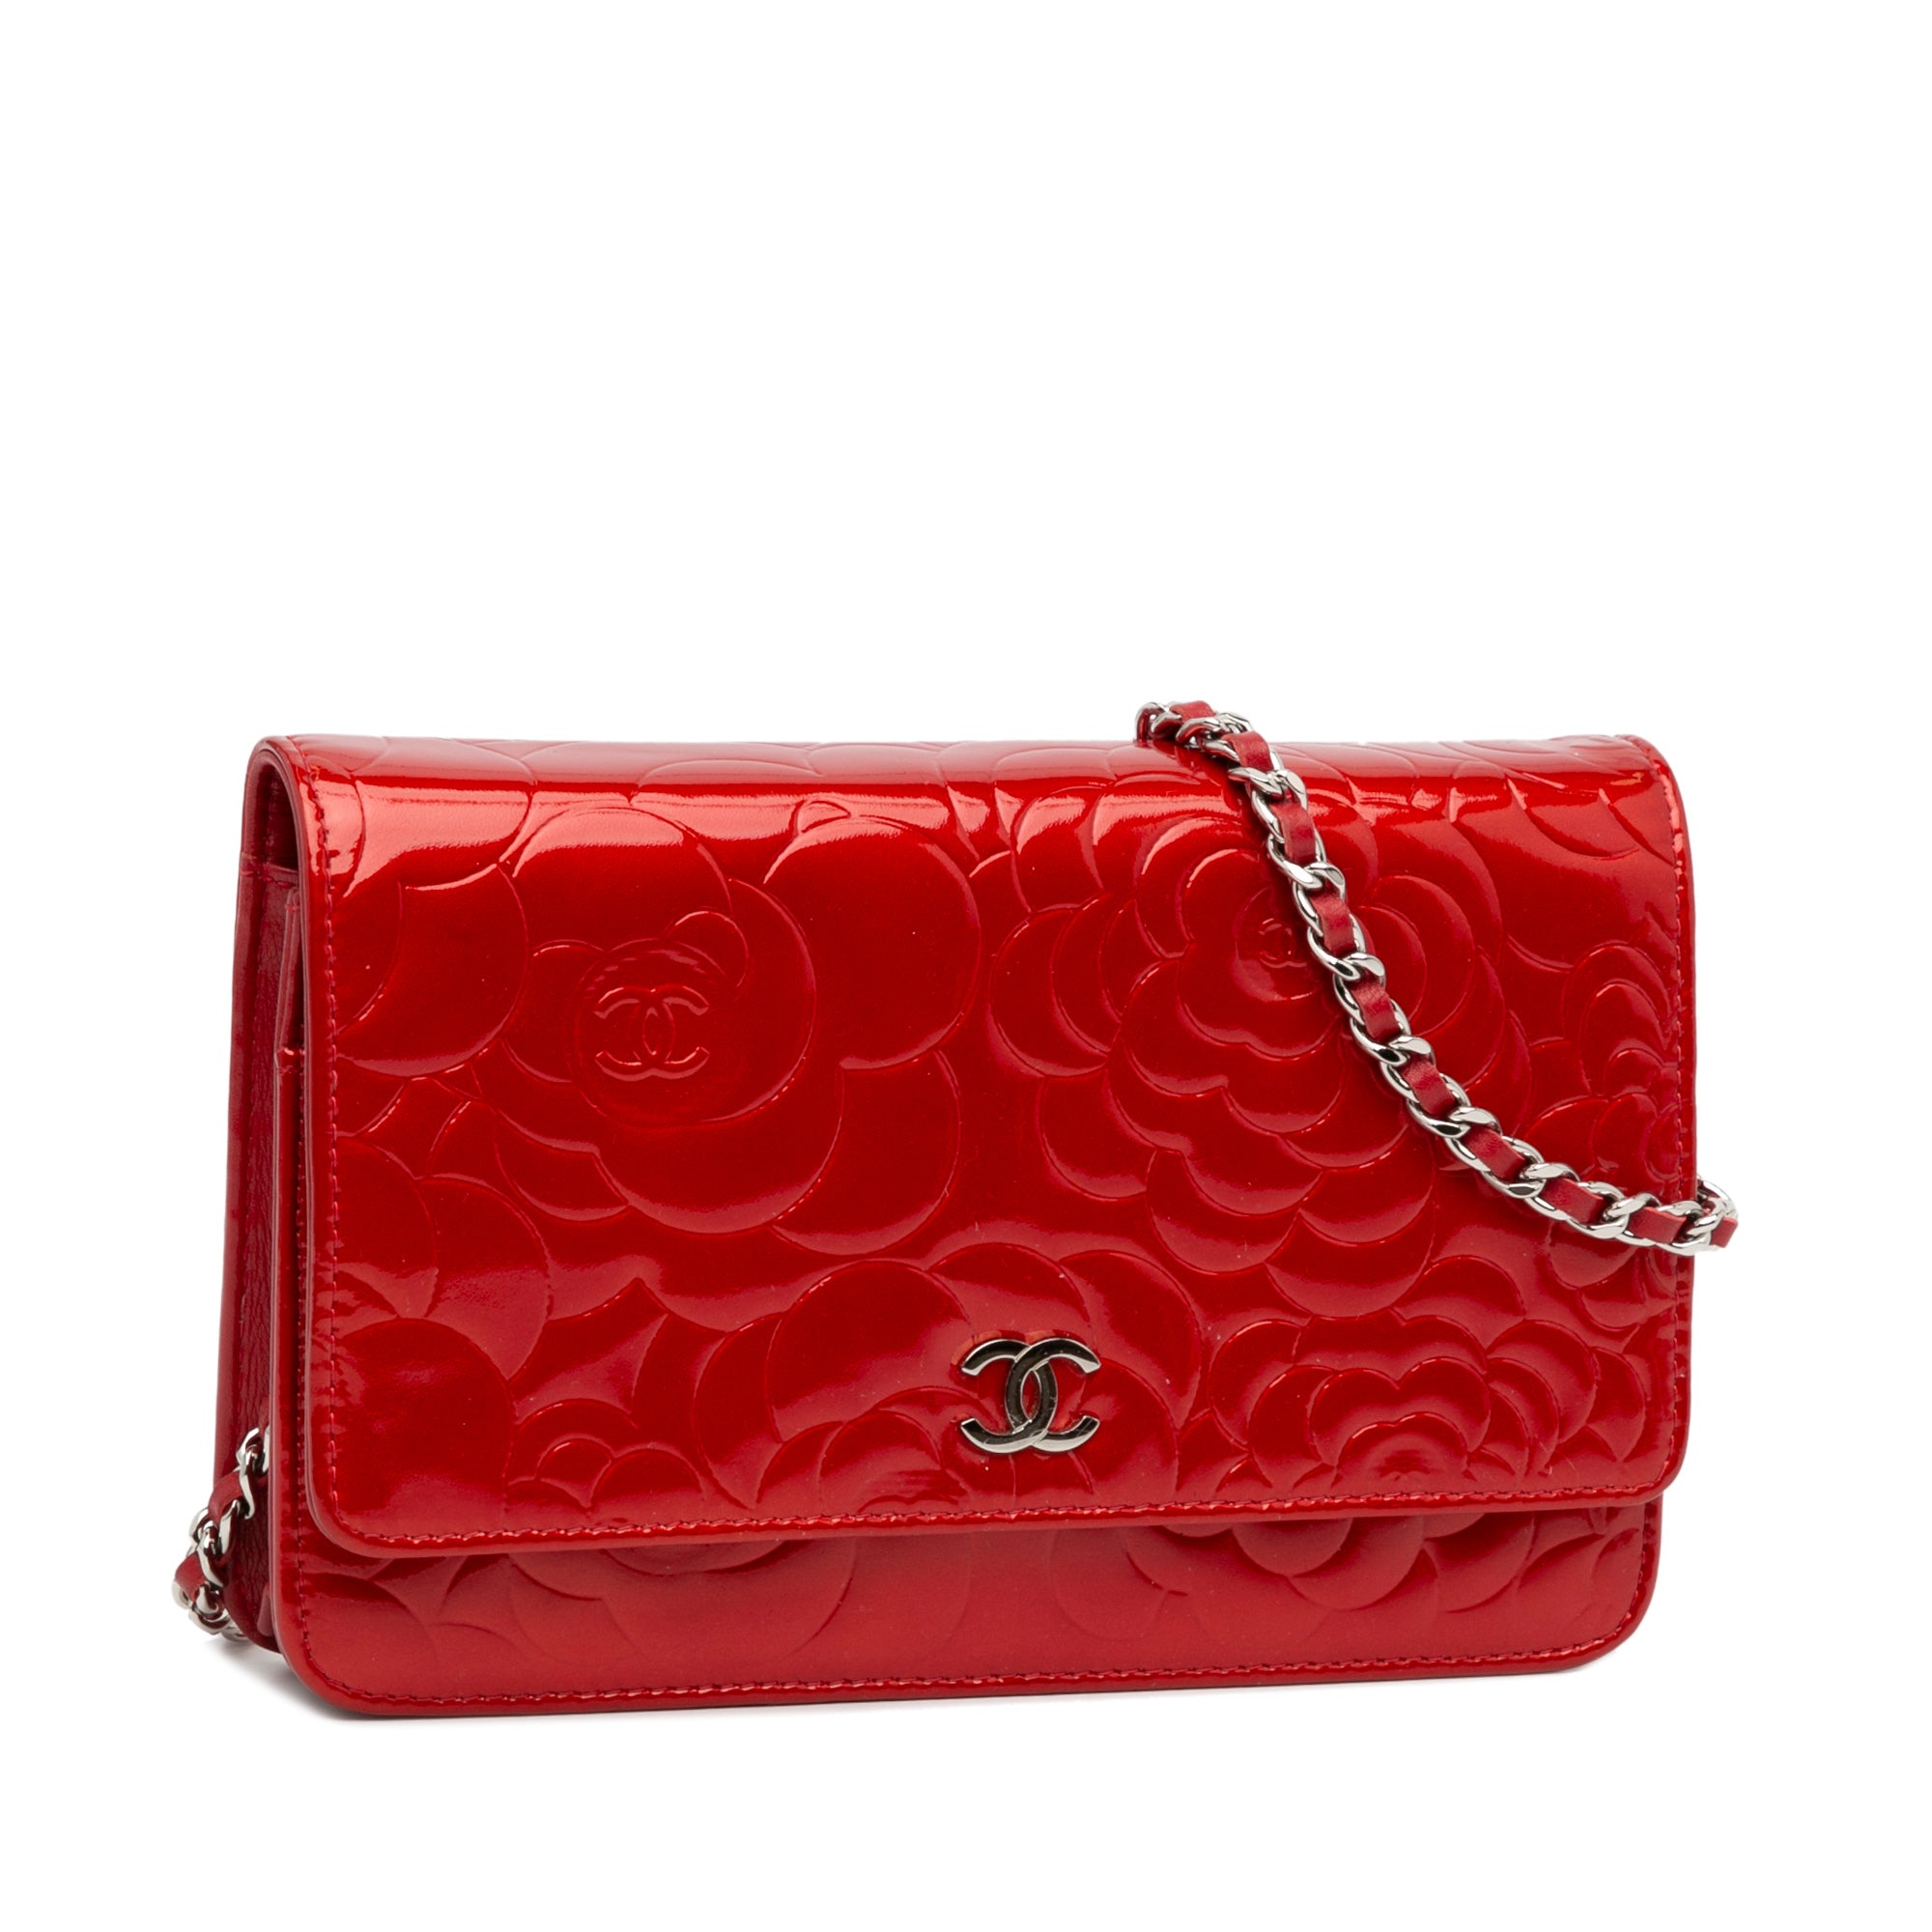 Red Chanel Camellia CC Wallet On Chain Crossbody Bag, Chanel Pre-Owned  2003-2004 tassel detail tote bag